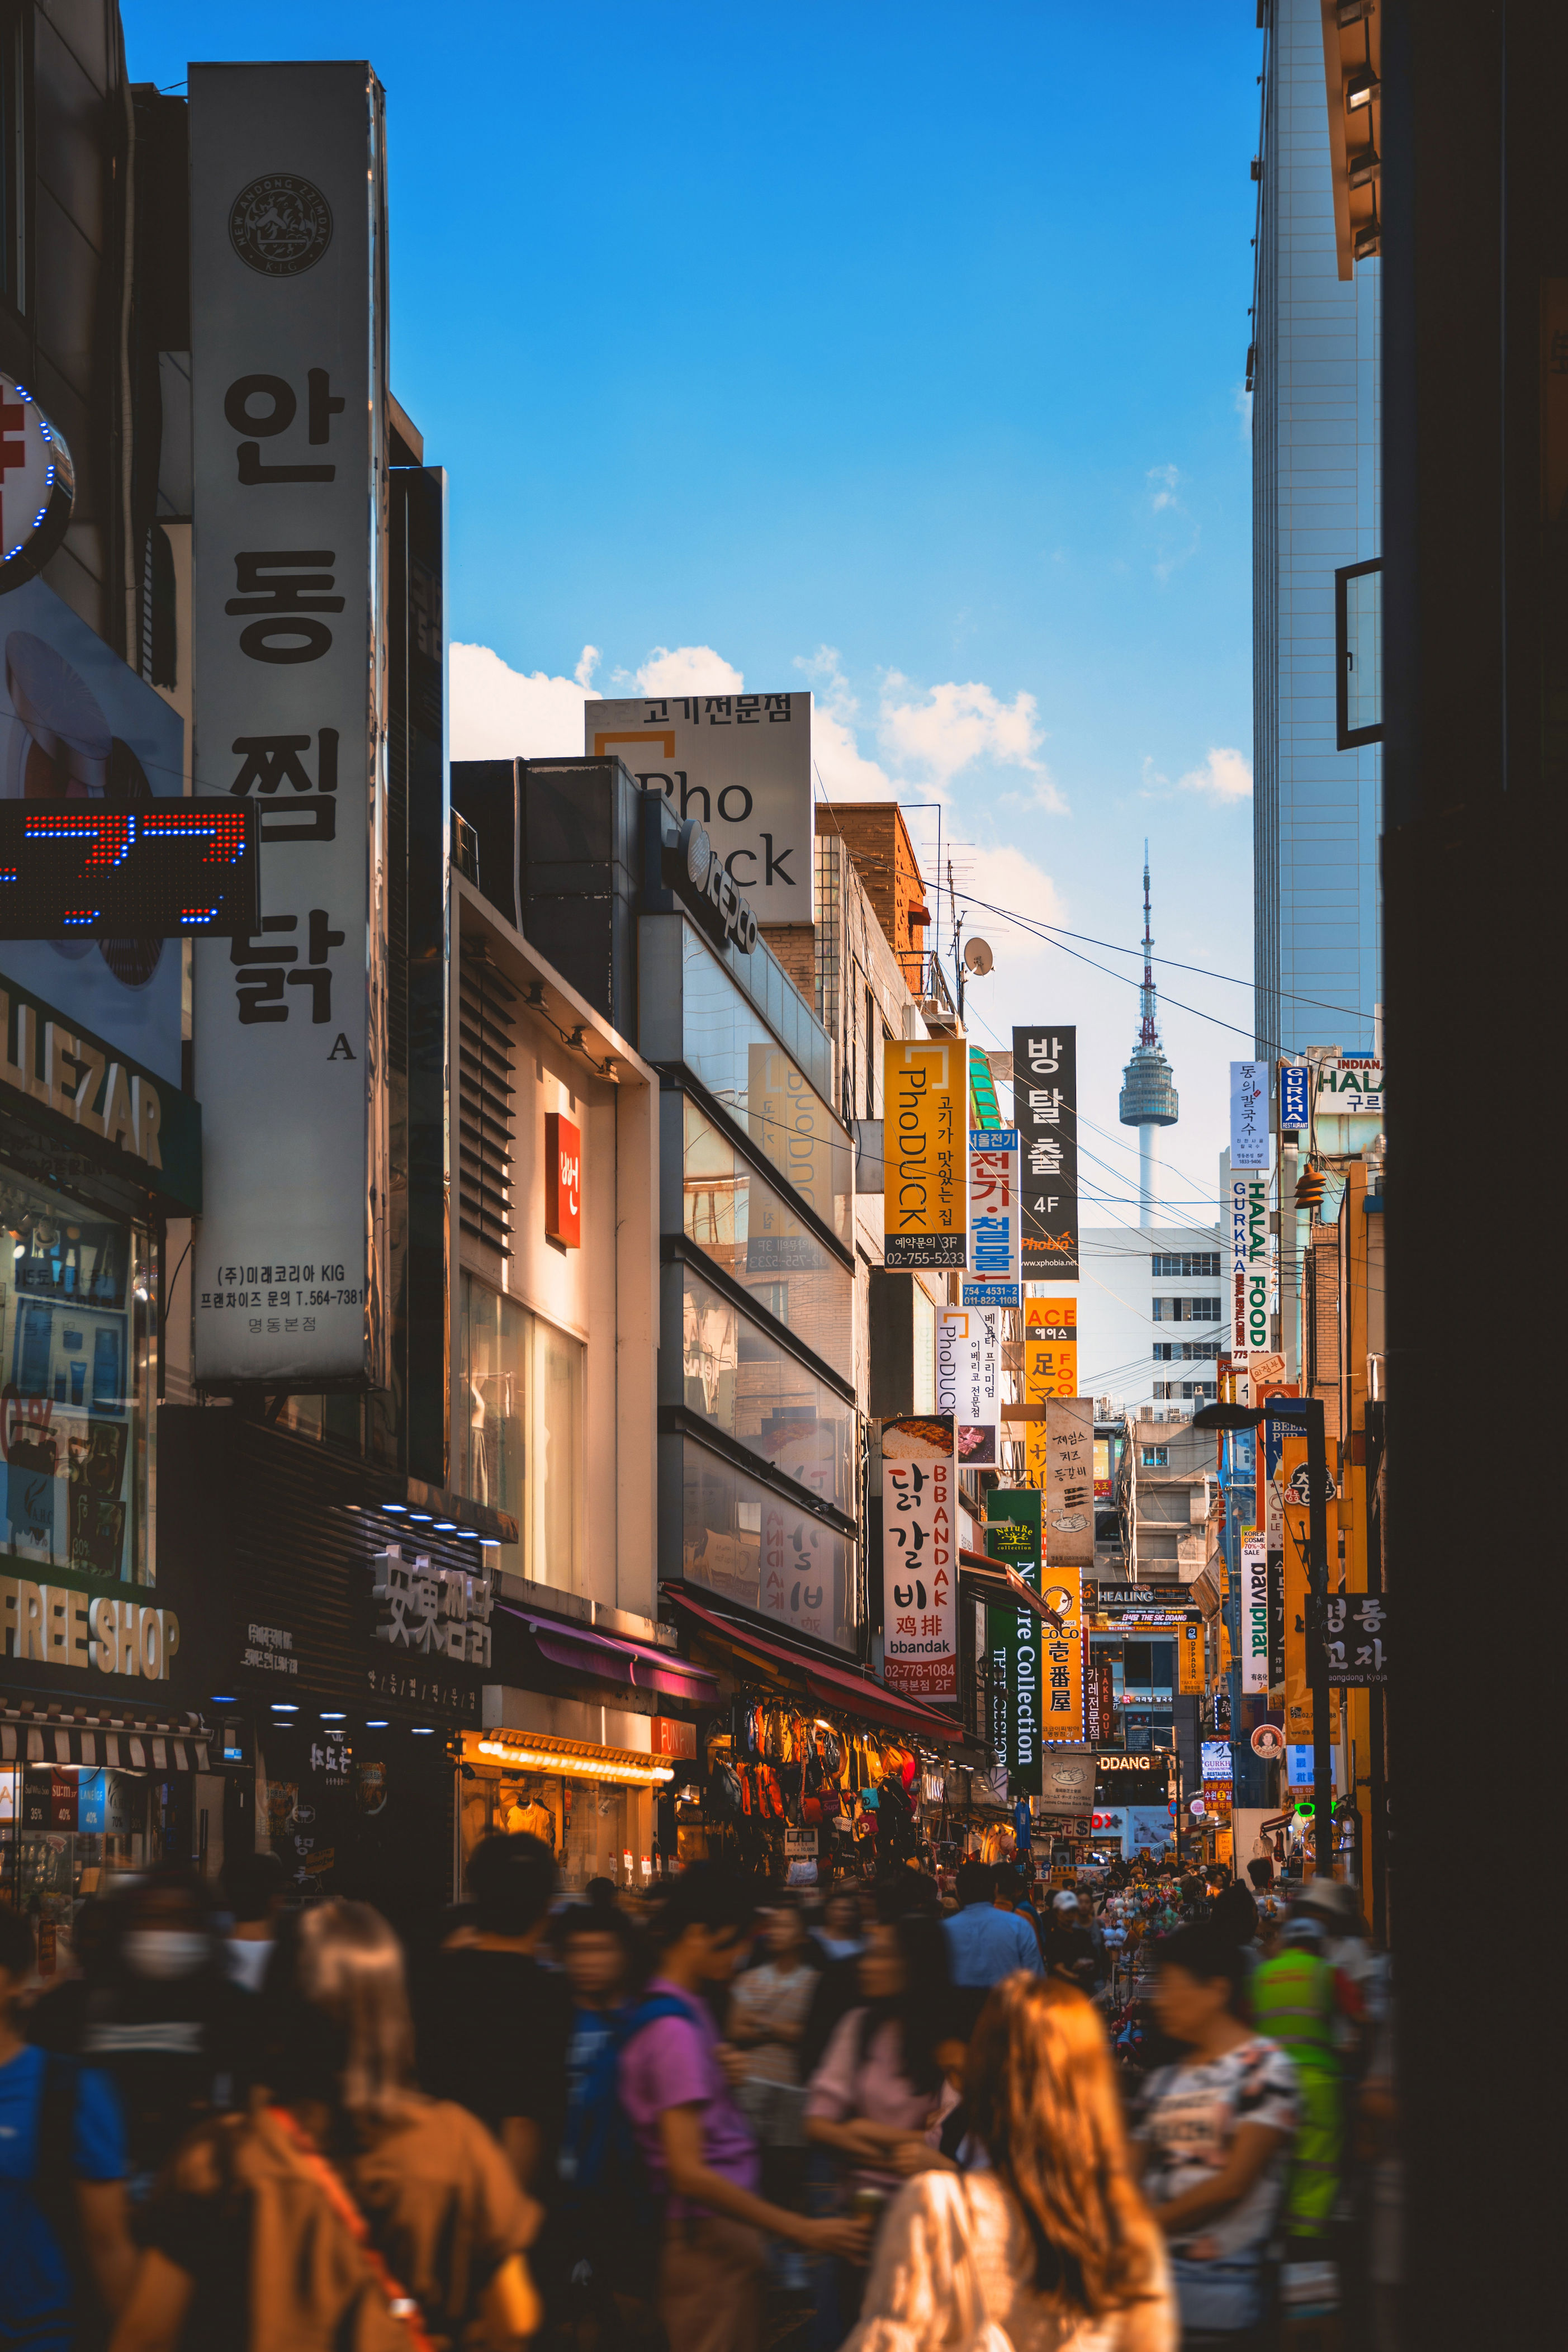 <p><a href="https://www.cntraveler.com/story/best-things-to-do-in-seoul?mbid=synd_msn_rss&utm_source=msn&utm_medium=syndication">Seoul</a> is home to some of the world’s largest, fastest, and most reliable public transit systems. The city goes the extra mile to make sure its public transportation is easily navigable by people from all over the world.</p> <p>For example, stations have signage in Korean and English and stops are announced in Korean, English, Chinese, and Japanese. To make navigation even easier, each line is color-coded and numbered, and every station has a corresponding number for identification. Many stations also feature restaurants, shopping boutiques, convenience stores, and even surprise concerts.</p> <p>Buses are also color-coded by distance and destination type, and all bus stops are clearly marked—plus, many offer heated seats. Every metro station is accessible by elevators, climate-controlled, and equipped with clean public restrooms and breastfeeding rooms.</p> <p>Onboard the trains, every subway car has yellow “priority seats” reserved for the elderly, those with physical disabilities or illnesses, and people with young children. Additionally, every car has pink seats reserved for pregnant women.</p> <p><strong>How to experience it:</strong> Take Seoul’s metro to Anguk Station (Line 3) to the 1000-year-old <a href="https://english.cha.go.kr/html/HtmlPage.do?pg=/royal/RoyalPalaces_1.jsp&mn=EN_02_03_02">Changdeokgung Palace</a>, a UNESCO Heritage site with opulent grounds and gardens featuring 56,000 plants.</p><p>Sign up to receive the latest news, expert tips, and inspiration on all things travel</p><a href="https://www.cntraveler.com/newsletter/the-daily?sourceCode=msnsend">Inspire Me</a>